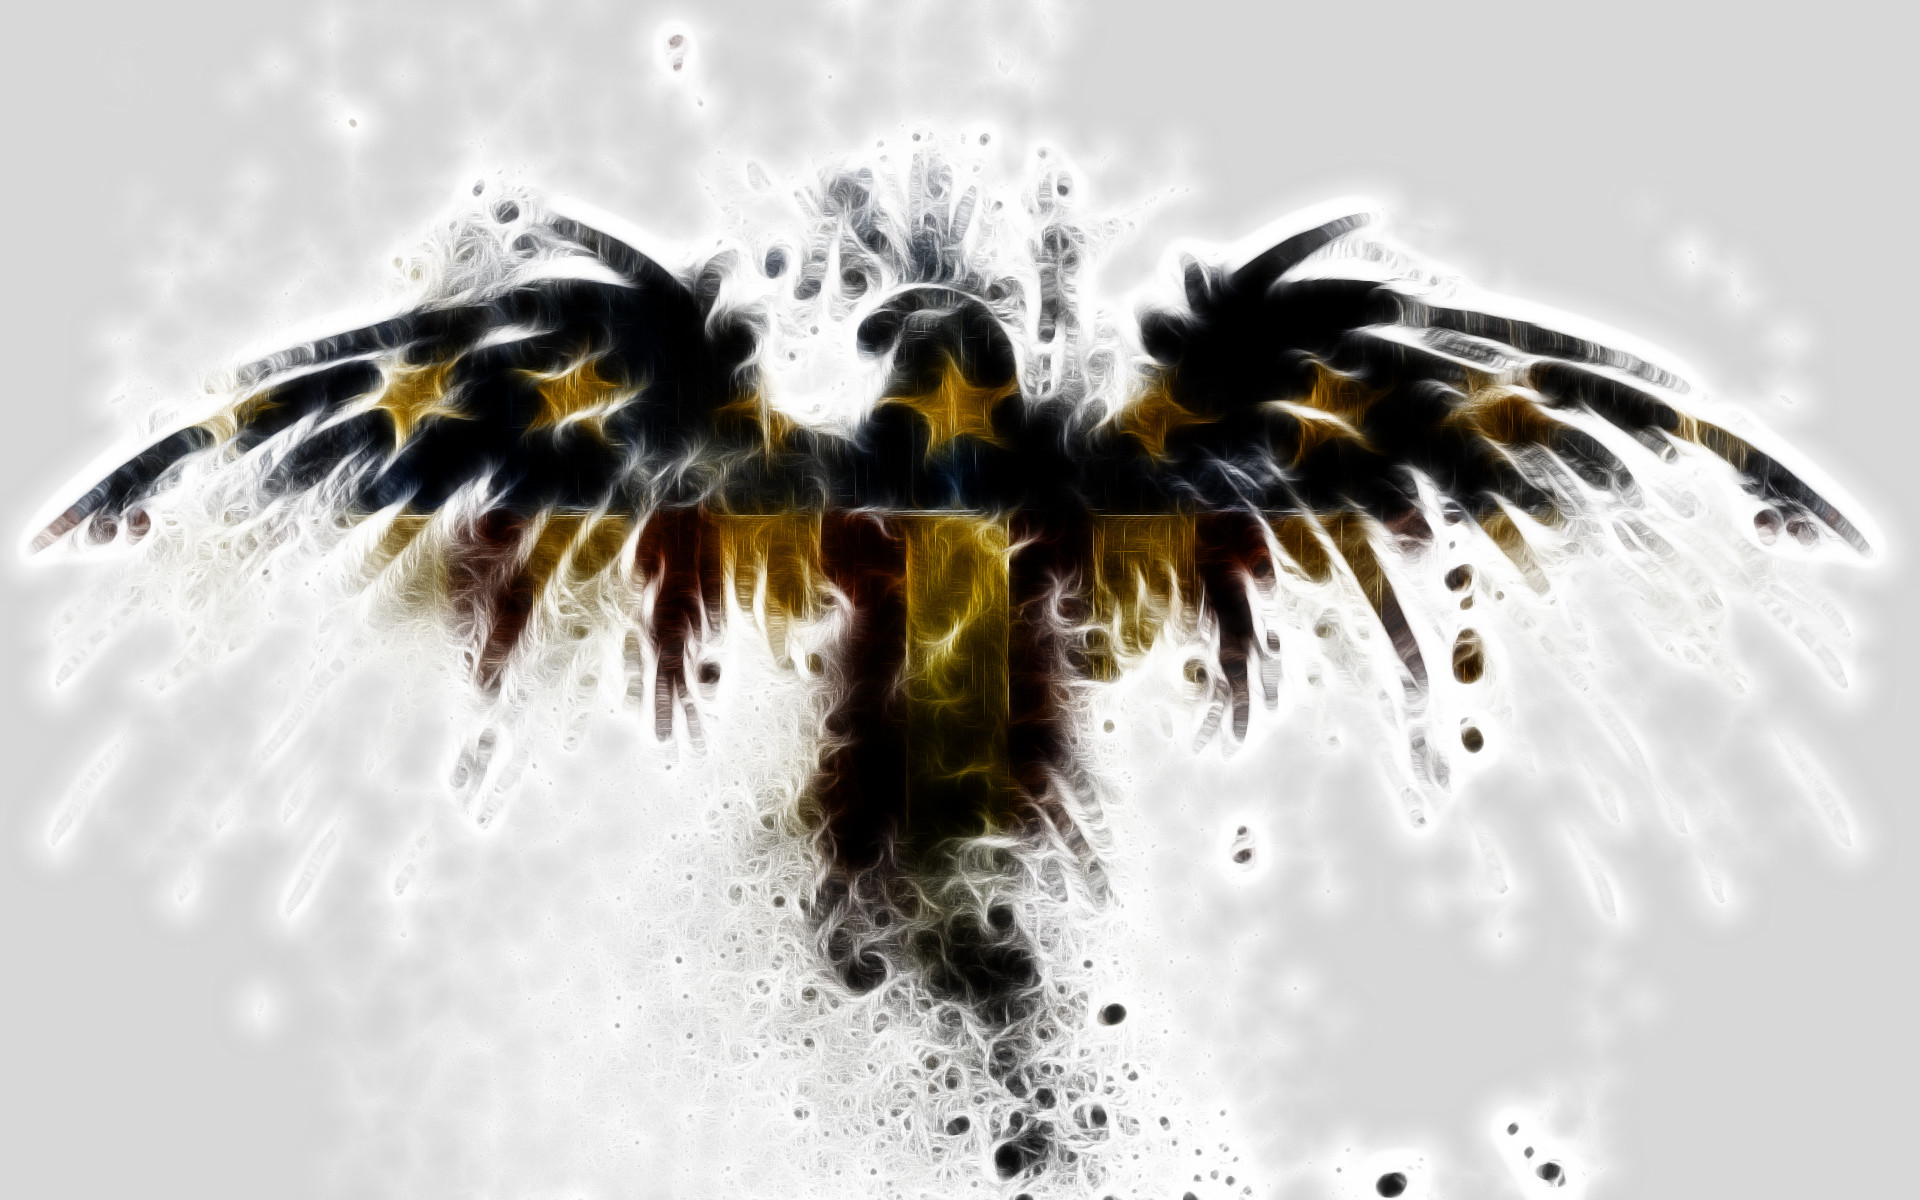 1920x1200 ... Interesting American Eagle Full HD Background Images Collection:   px on G.sFDcY ...